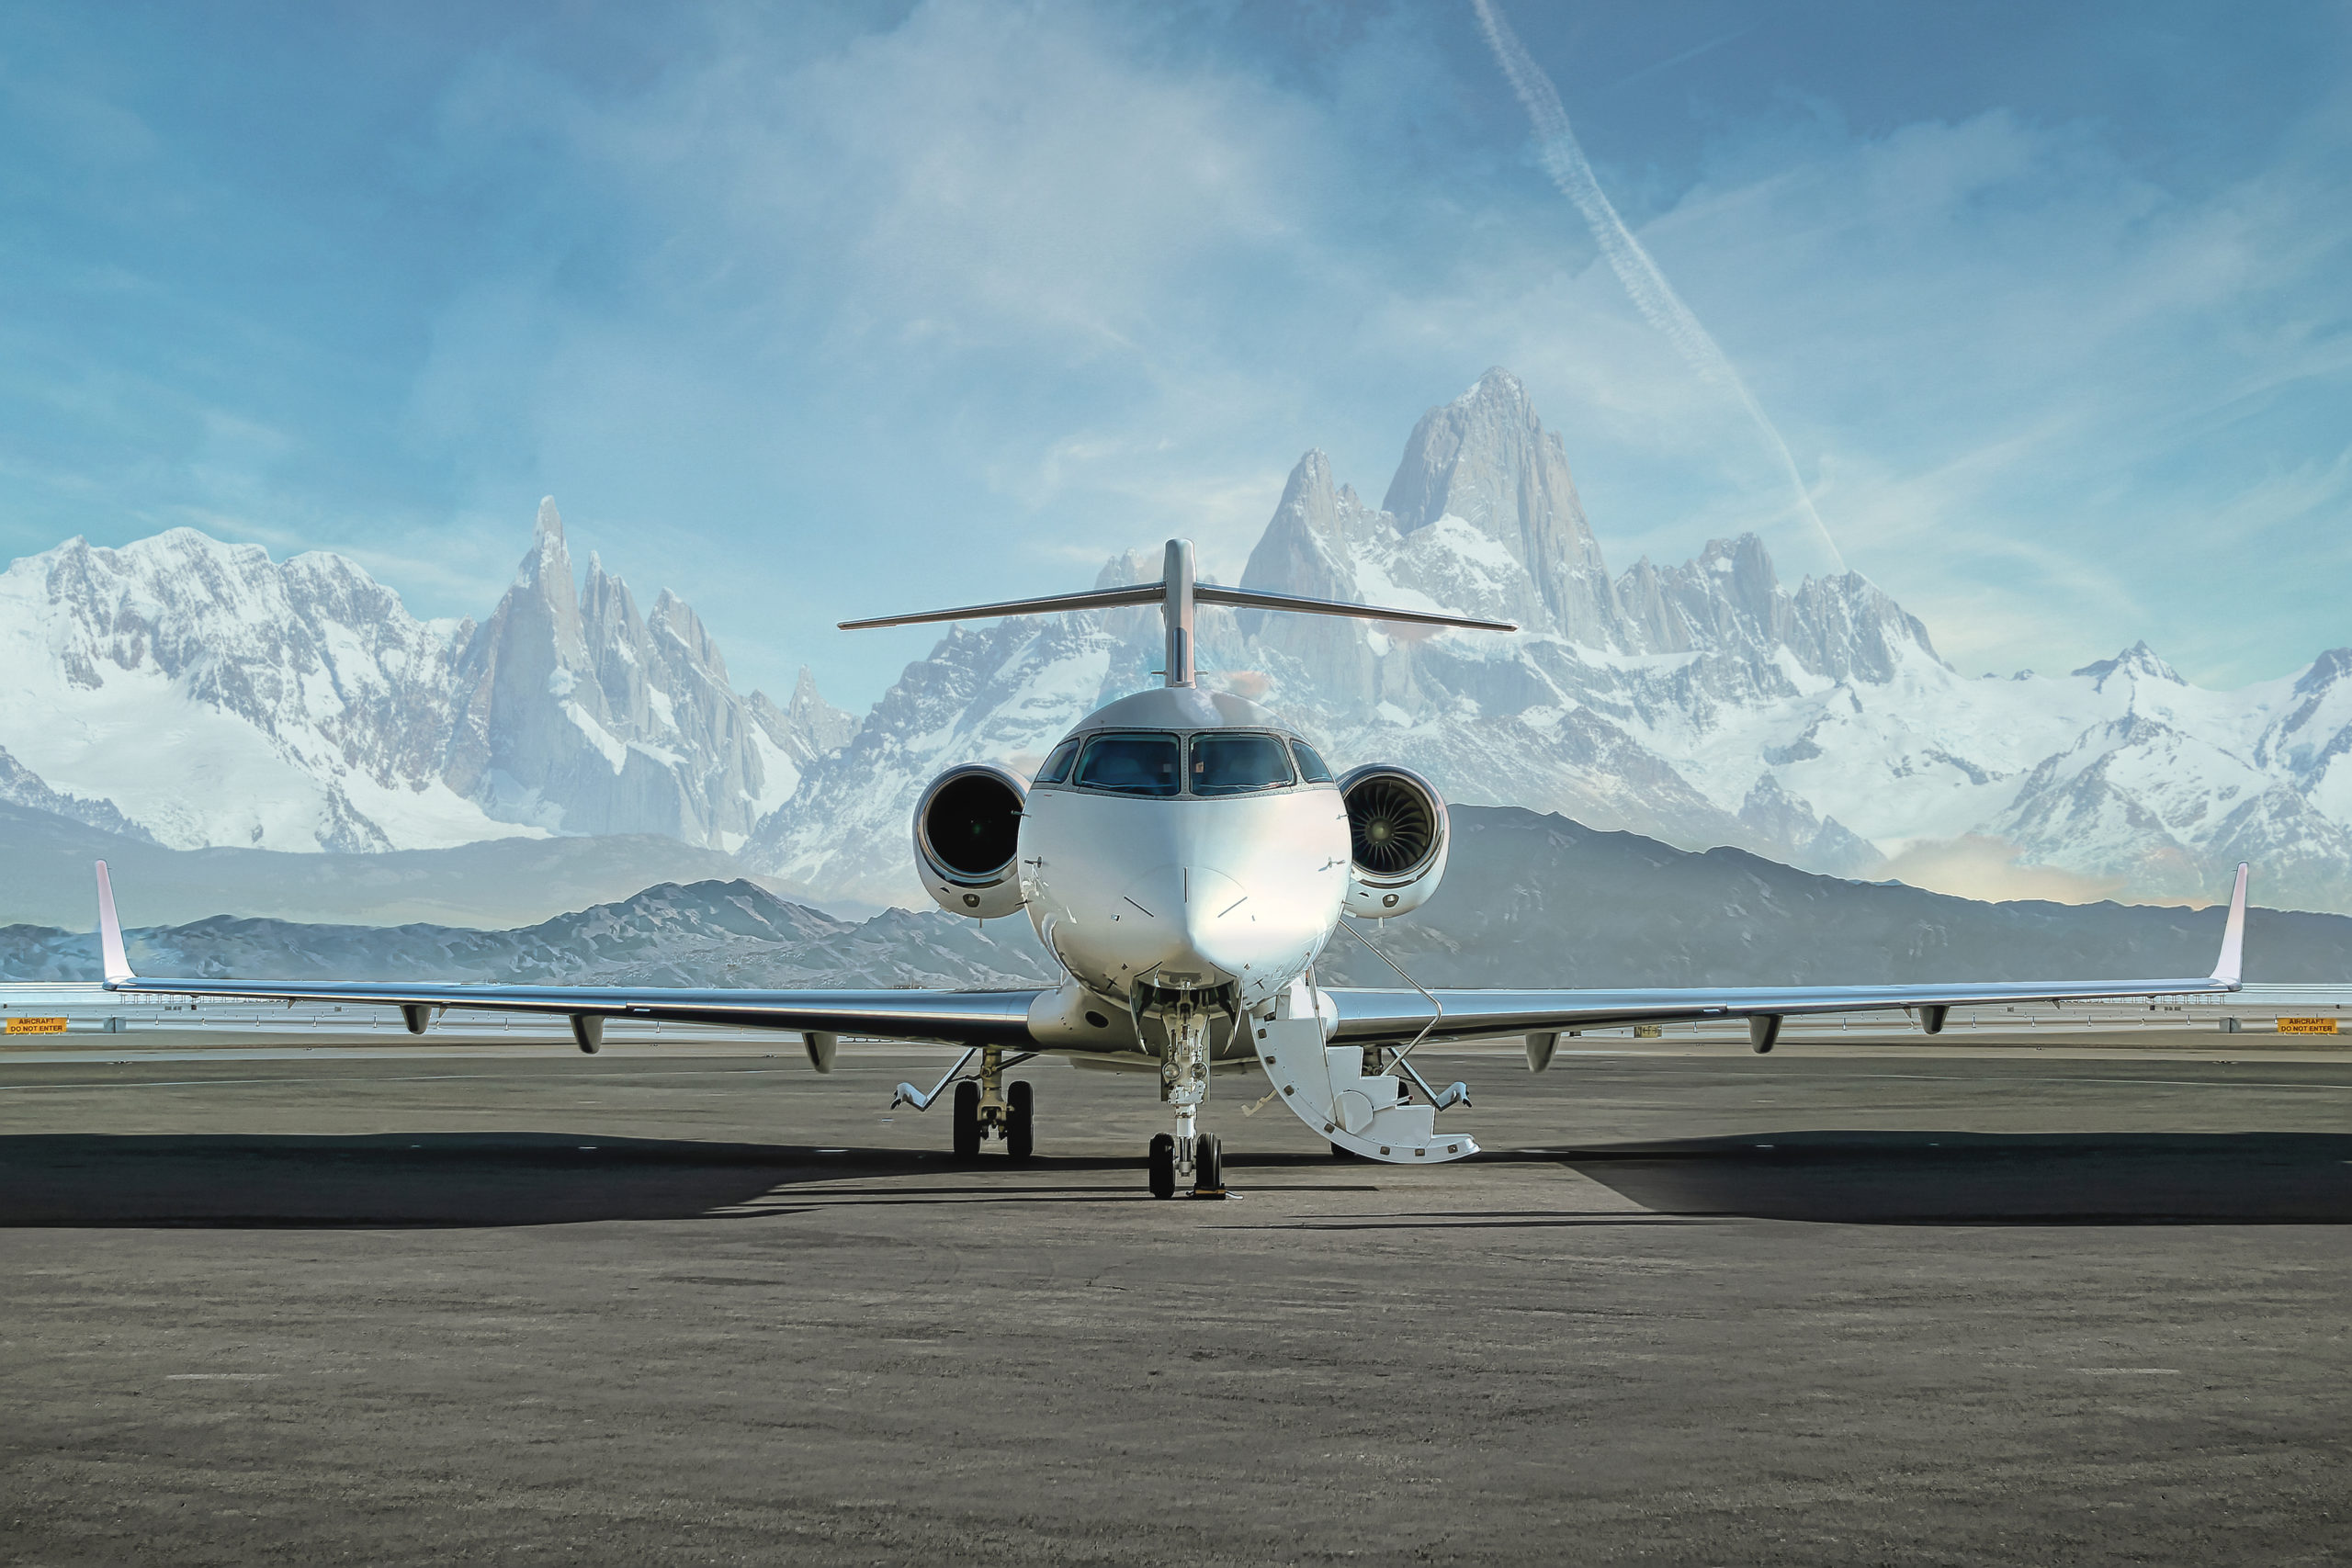 Head on photo of a private jet waiting on runway to be boarded with snowy mountains in the background